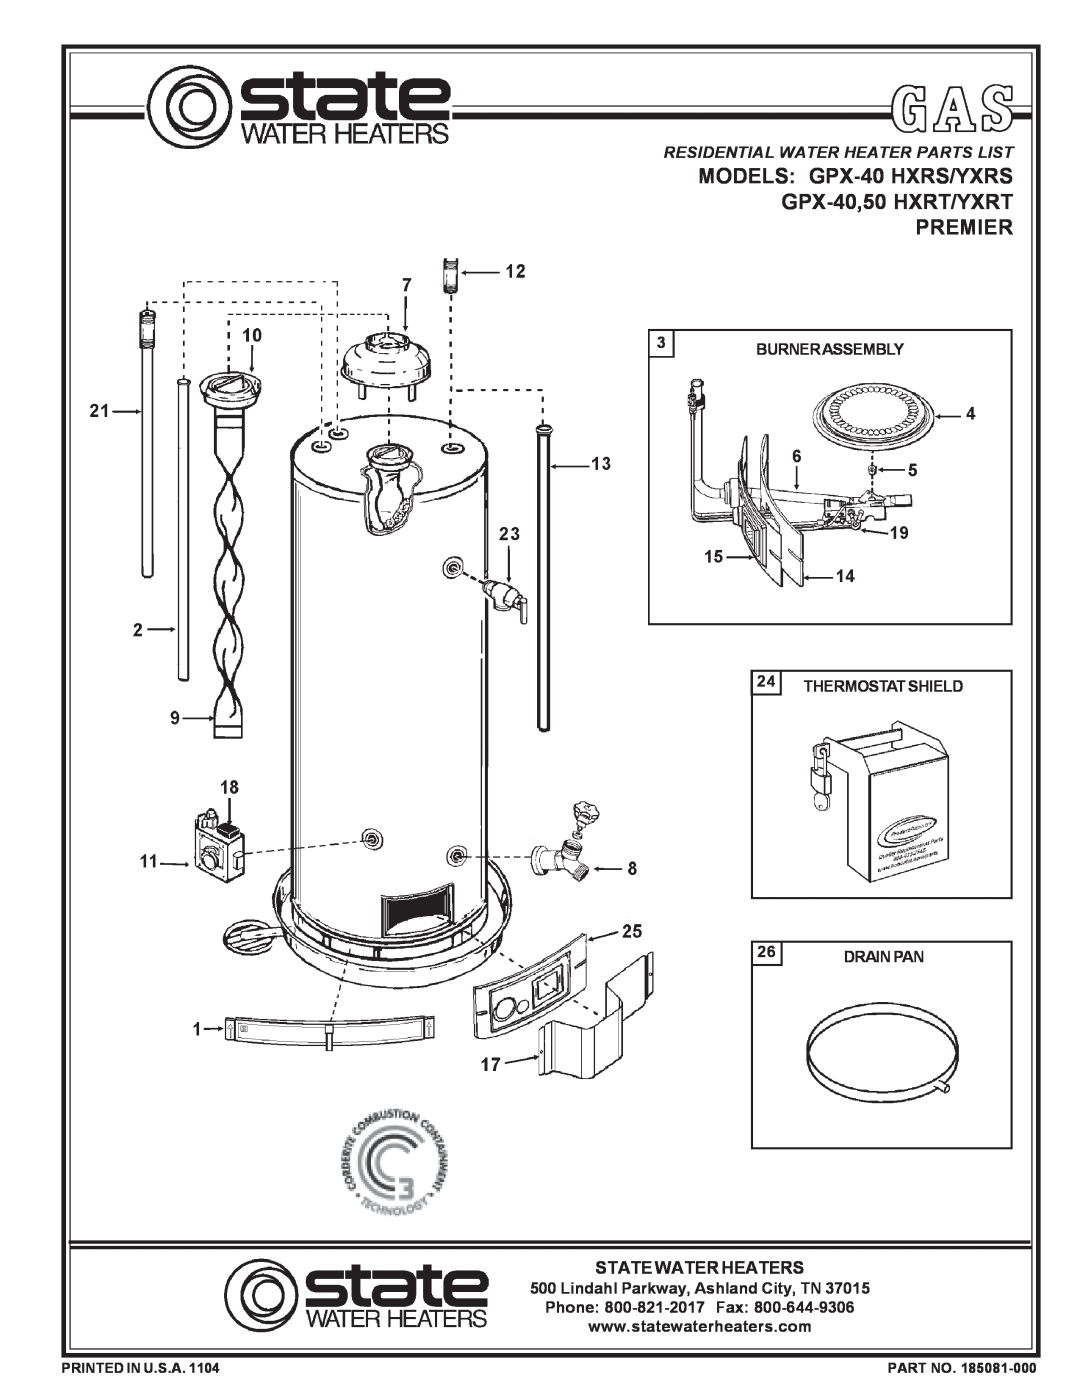 State Industries GPX-40 YXRS manual State Water Heaters, Burnerassembly, Thermostat Shield, Drain Pan, Printed In U.S.A 